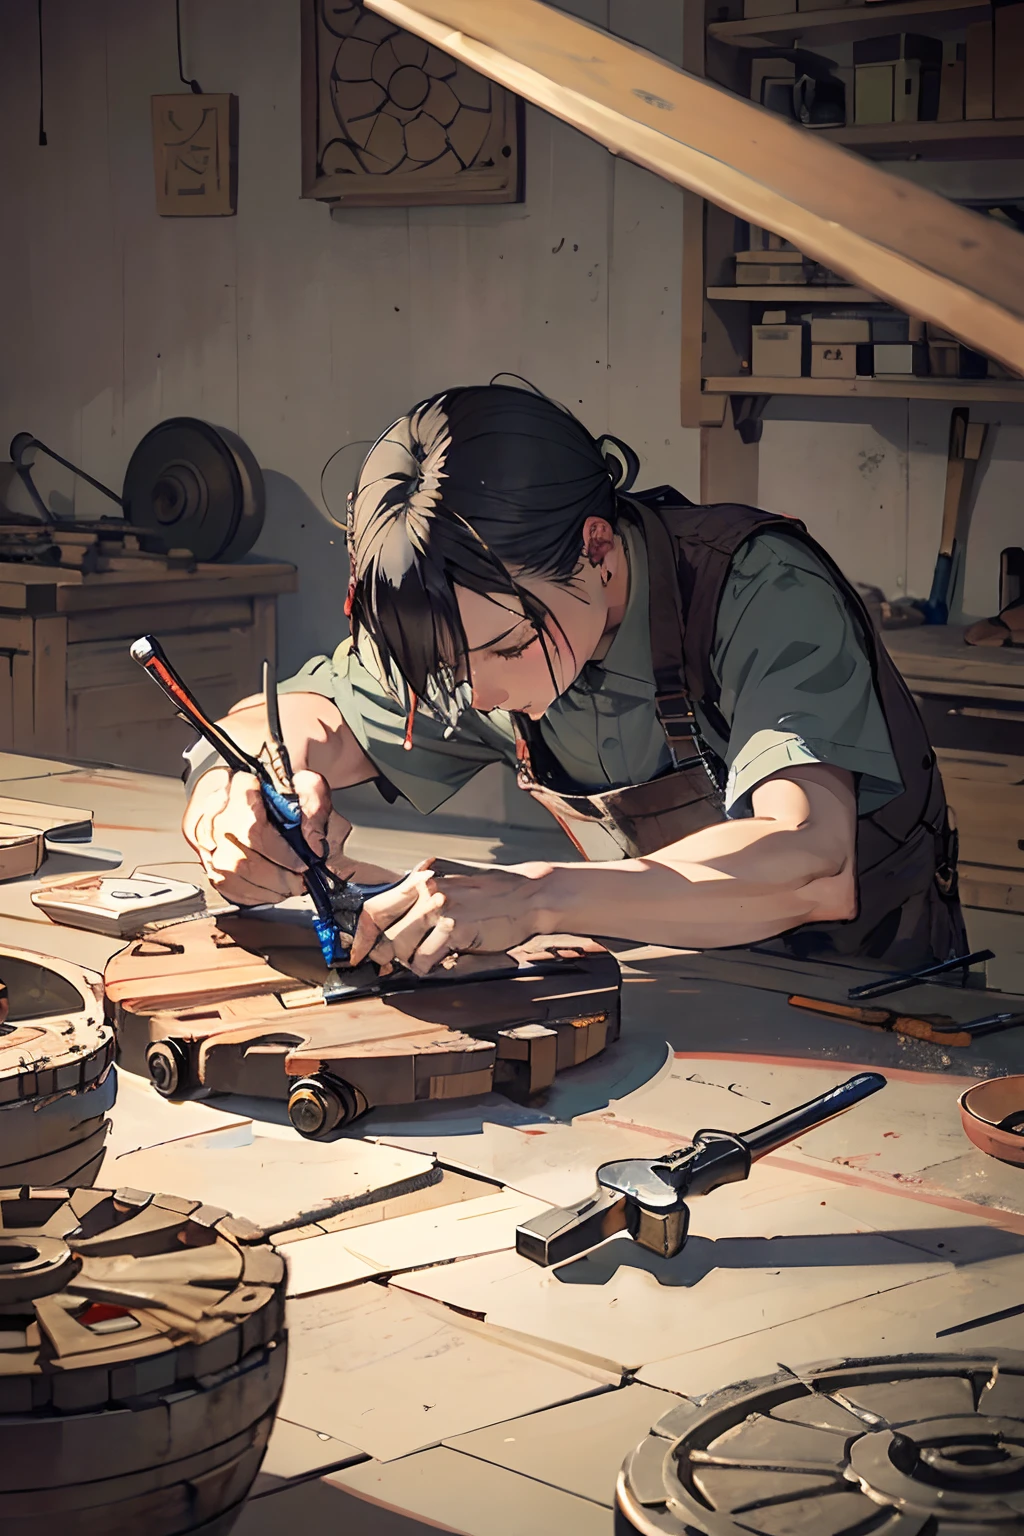 Illustrate a skilled craftsman meticulously working on common 도구 like 바퀴s and vehicles. Emphasize the craftsmanship and 정도 in the work.
키워드: 장인, 소년, 중국 미술품, 도구, 바퀴, 전문적 지식, 정도.